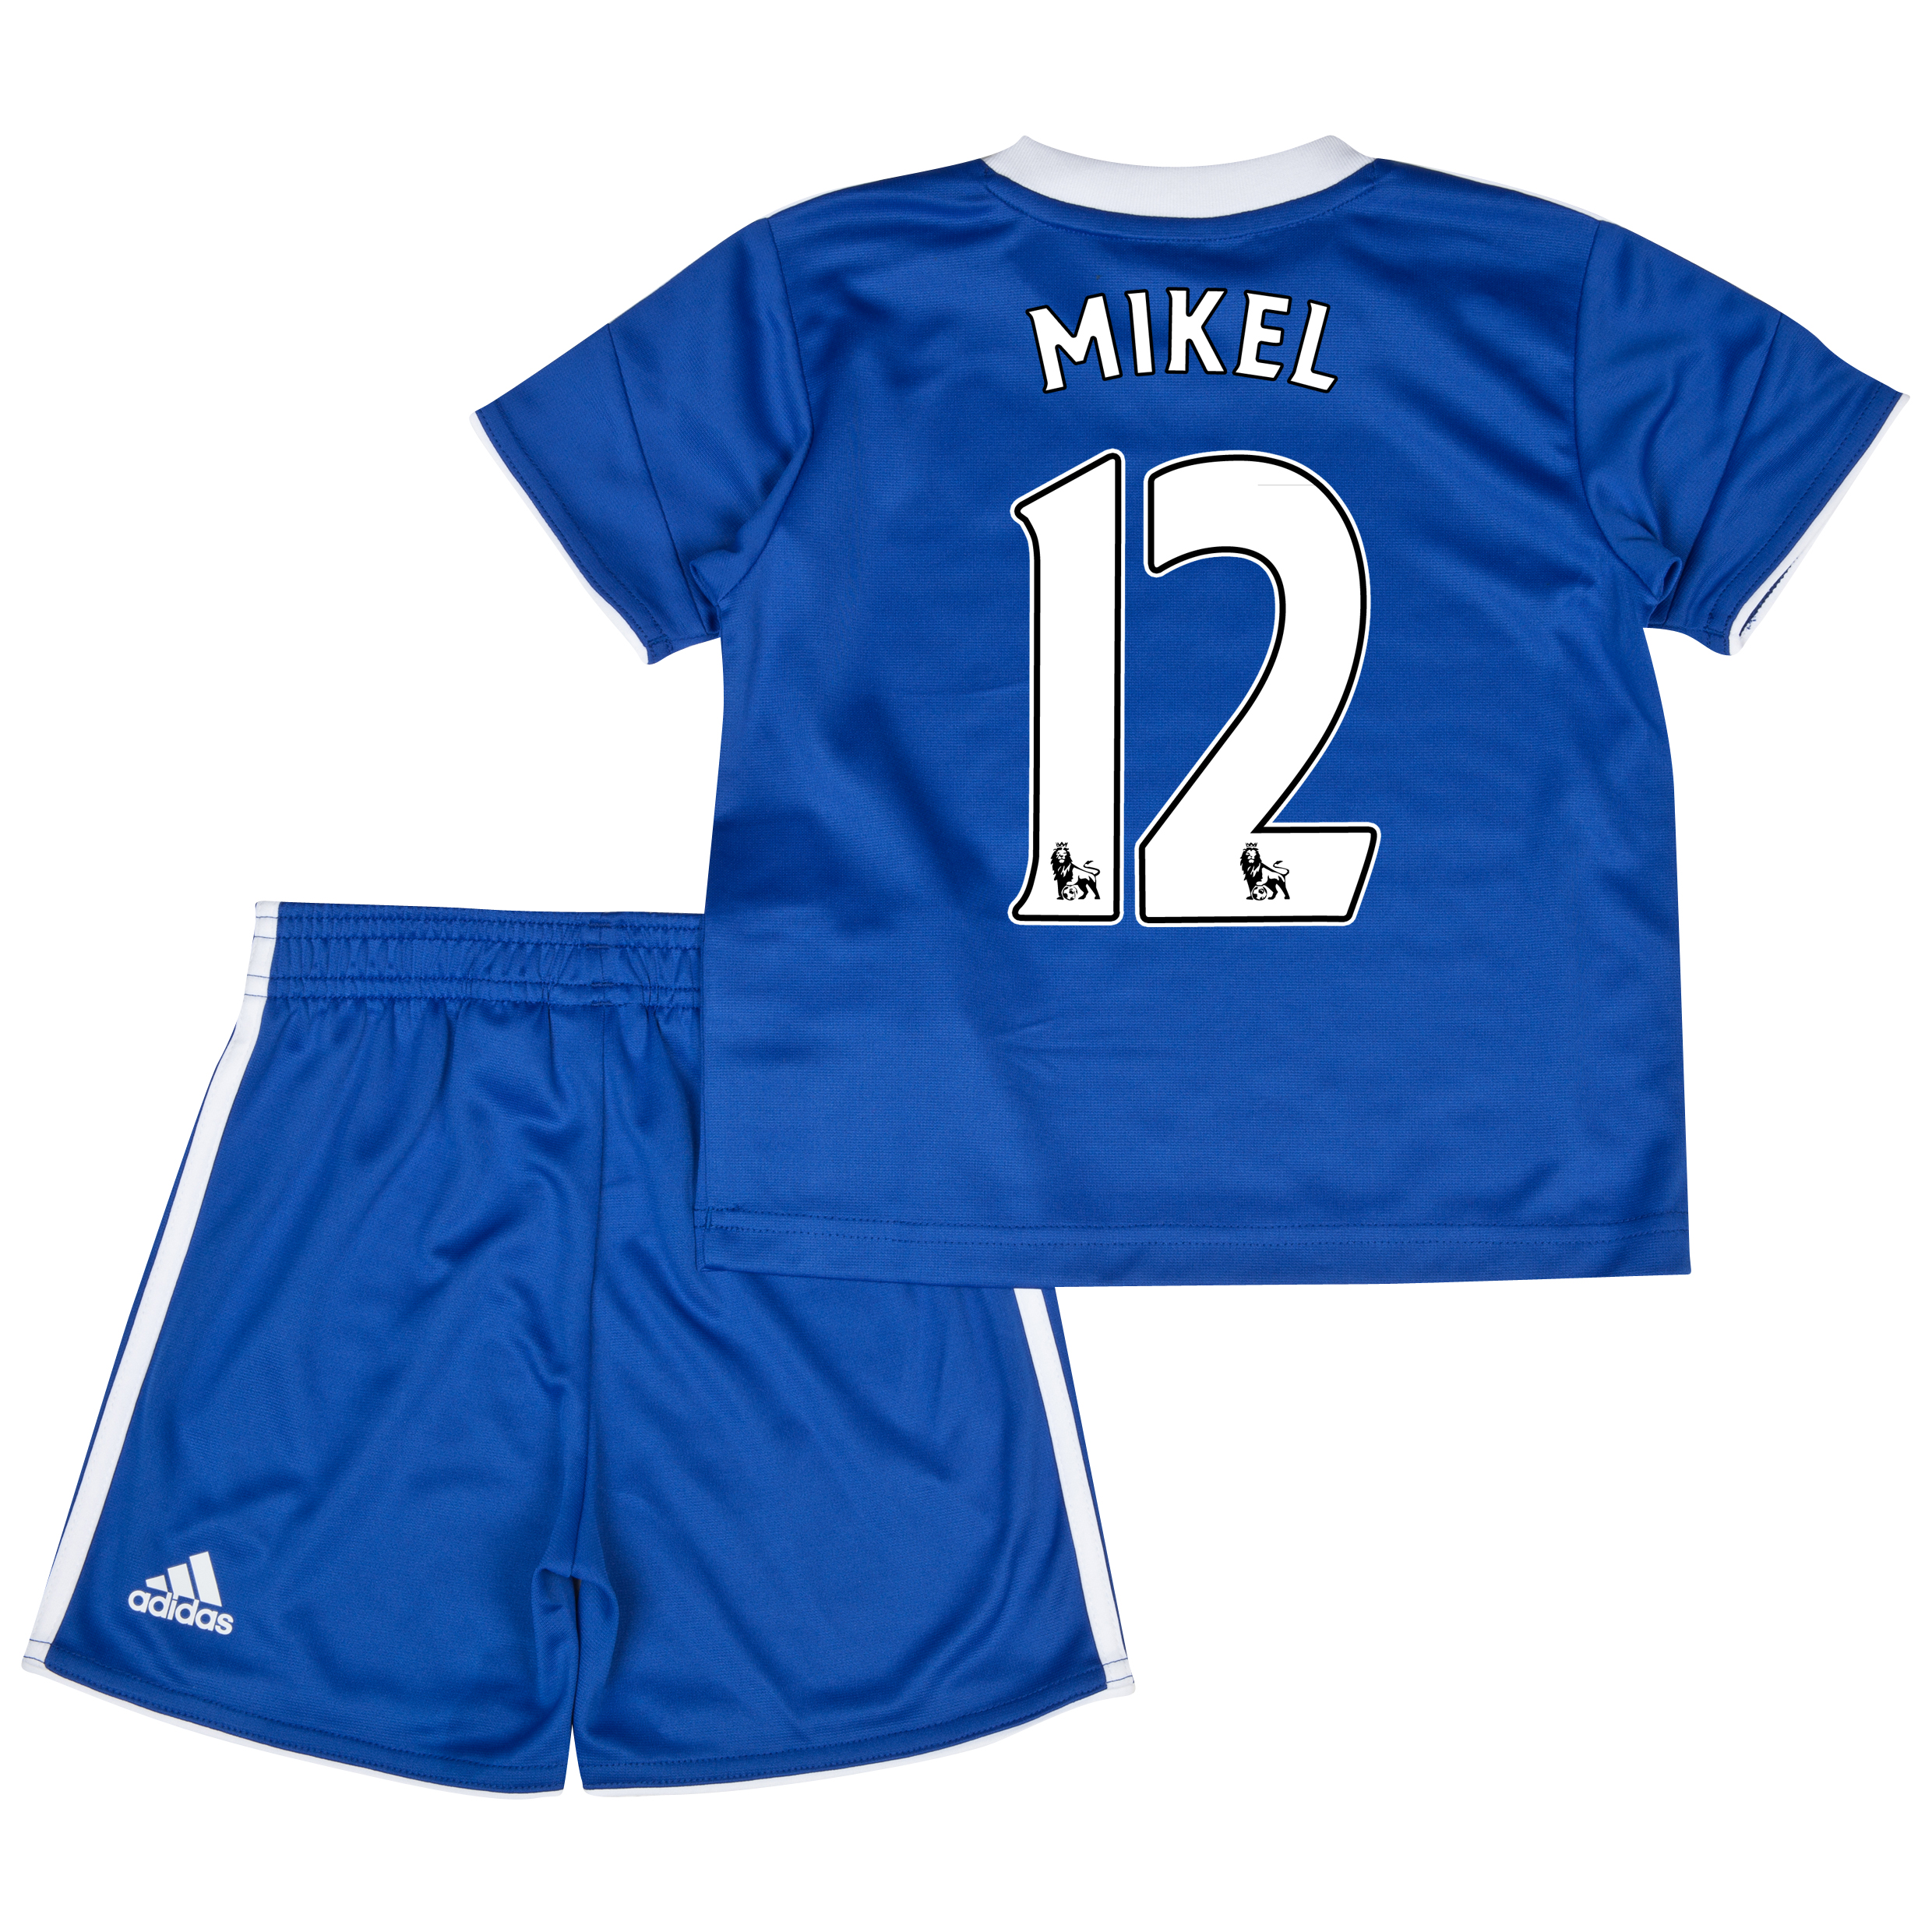 Chelsea Home Mini Kit 2013/14 with Mikel 12 printing